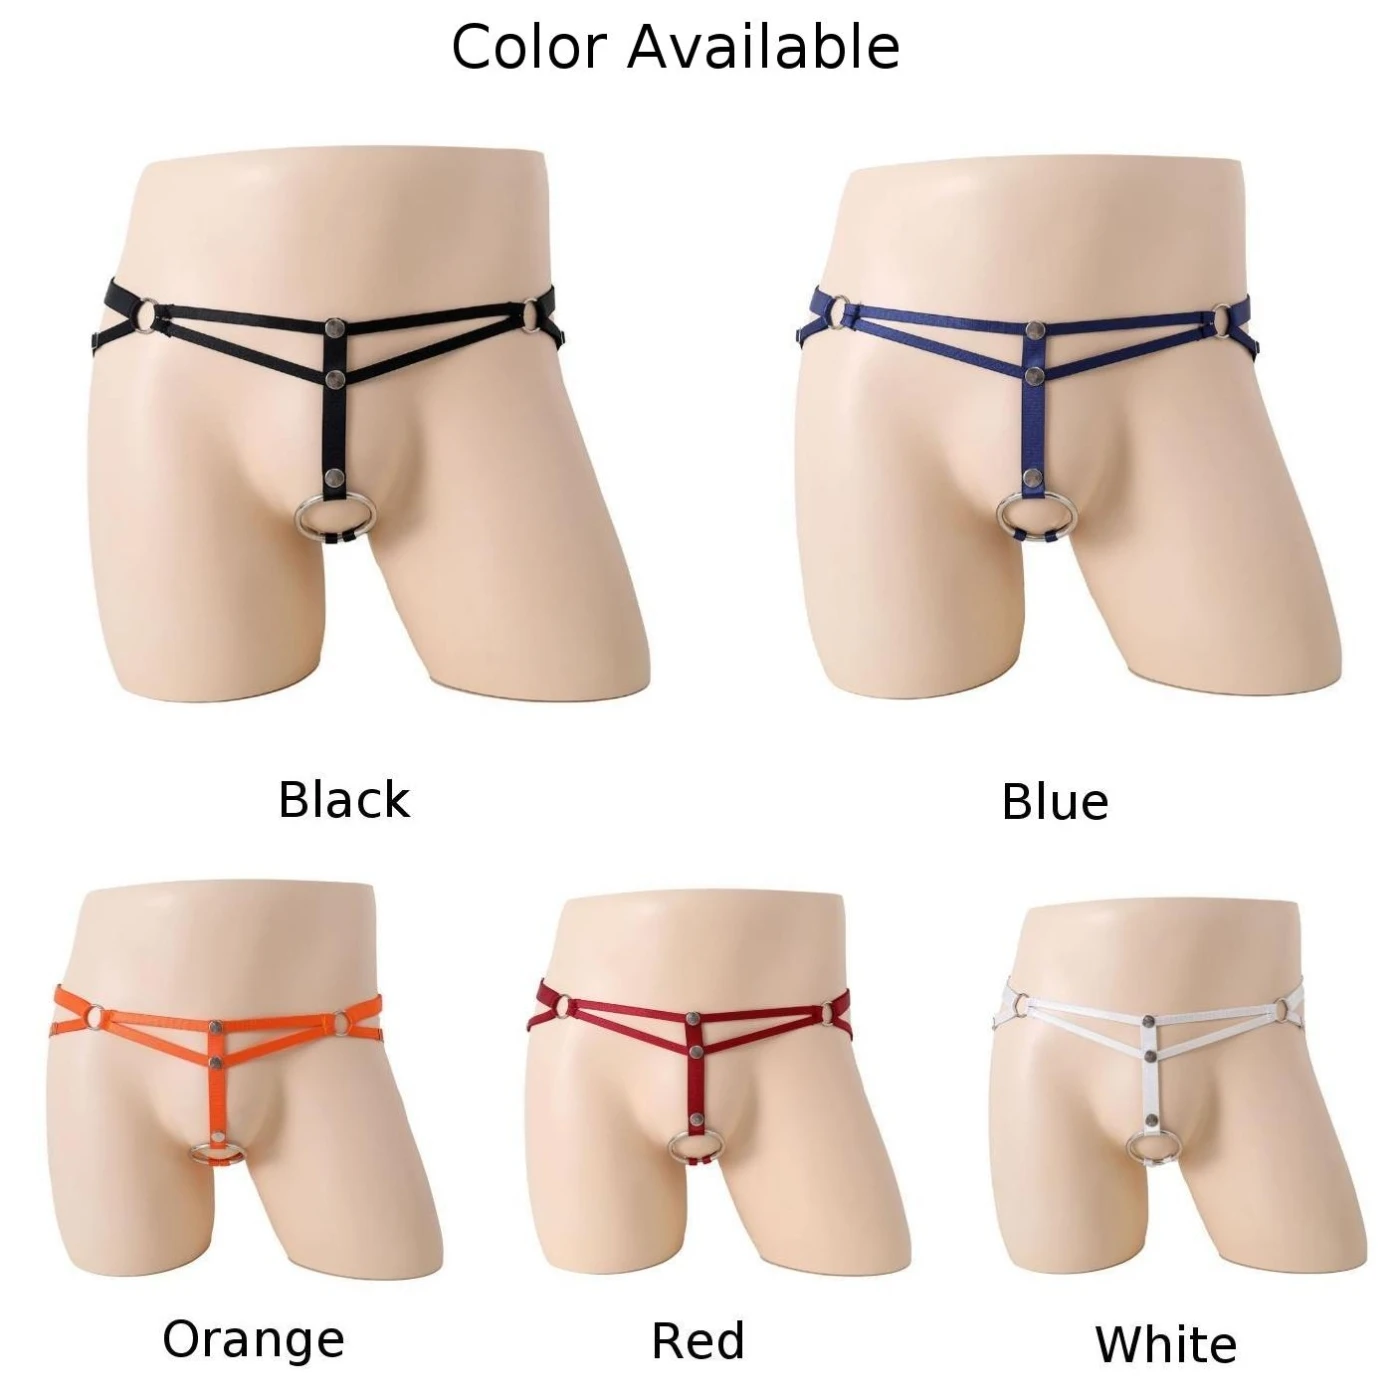 

Mens Crotchless Panties G-String Briefs Thongs T-back Underpants Low Rise Underwear O-Ring Hole Open Sheath Jockstrap Lingerie